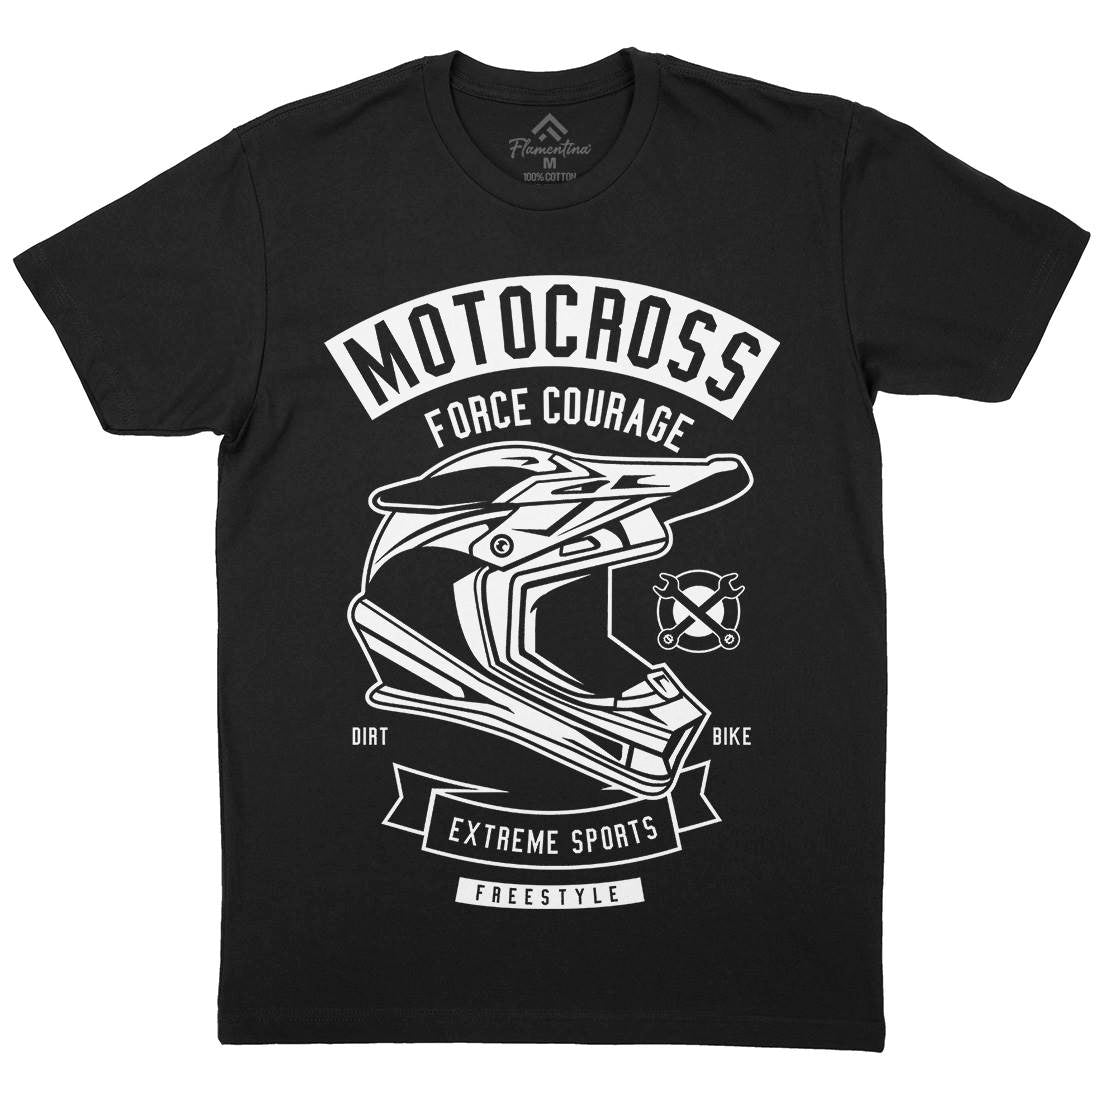 Motocross Force Courage Mens Organic Crew Neck T-Shirt Motorcycles B576